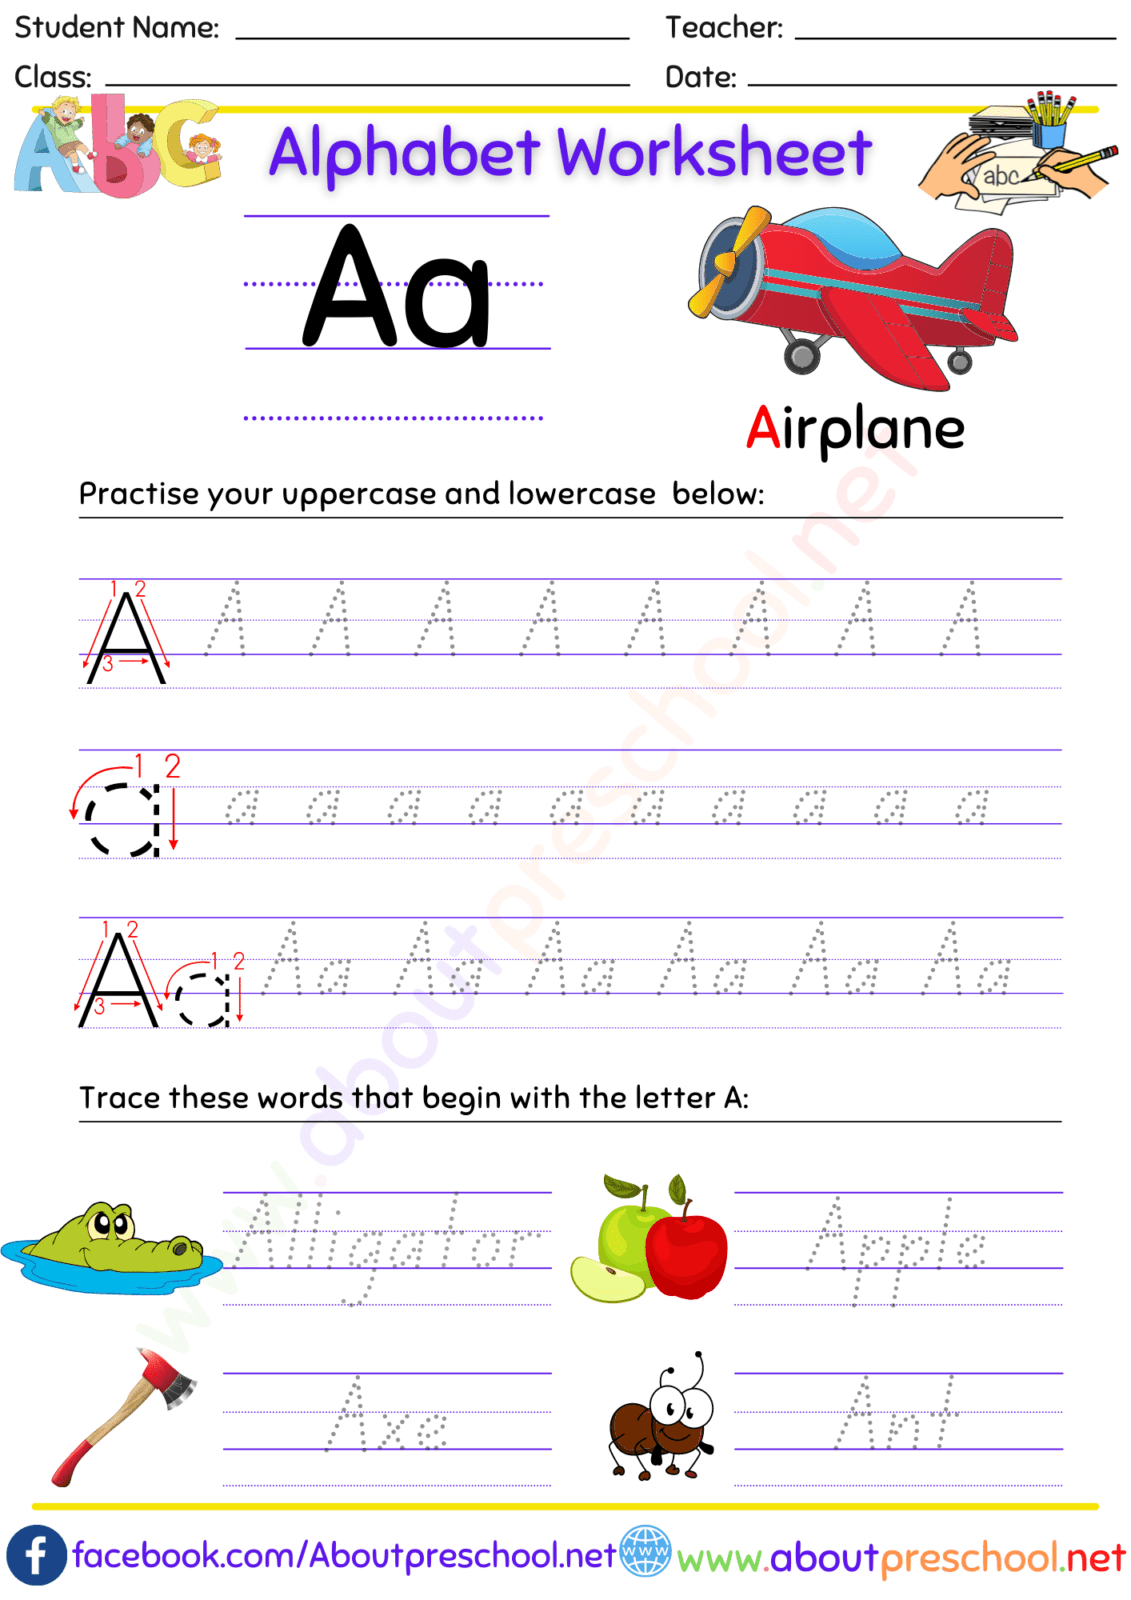 The Alphabet Worksheets-A